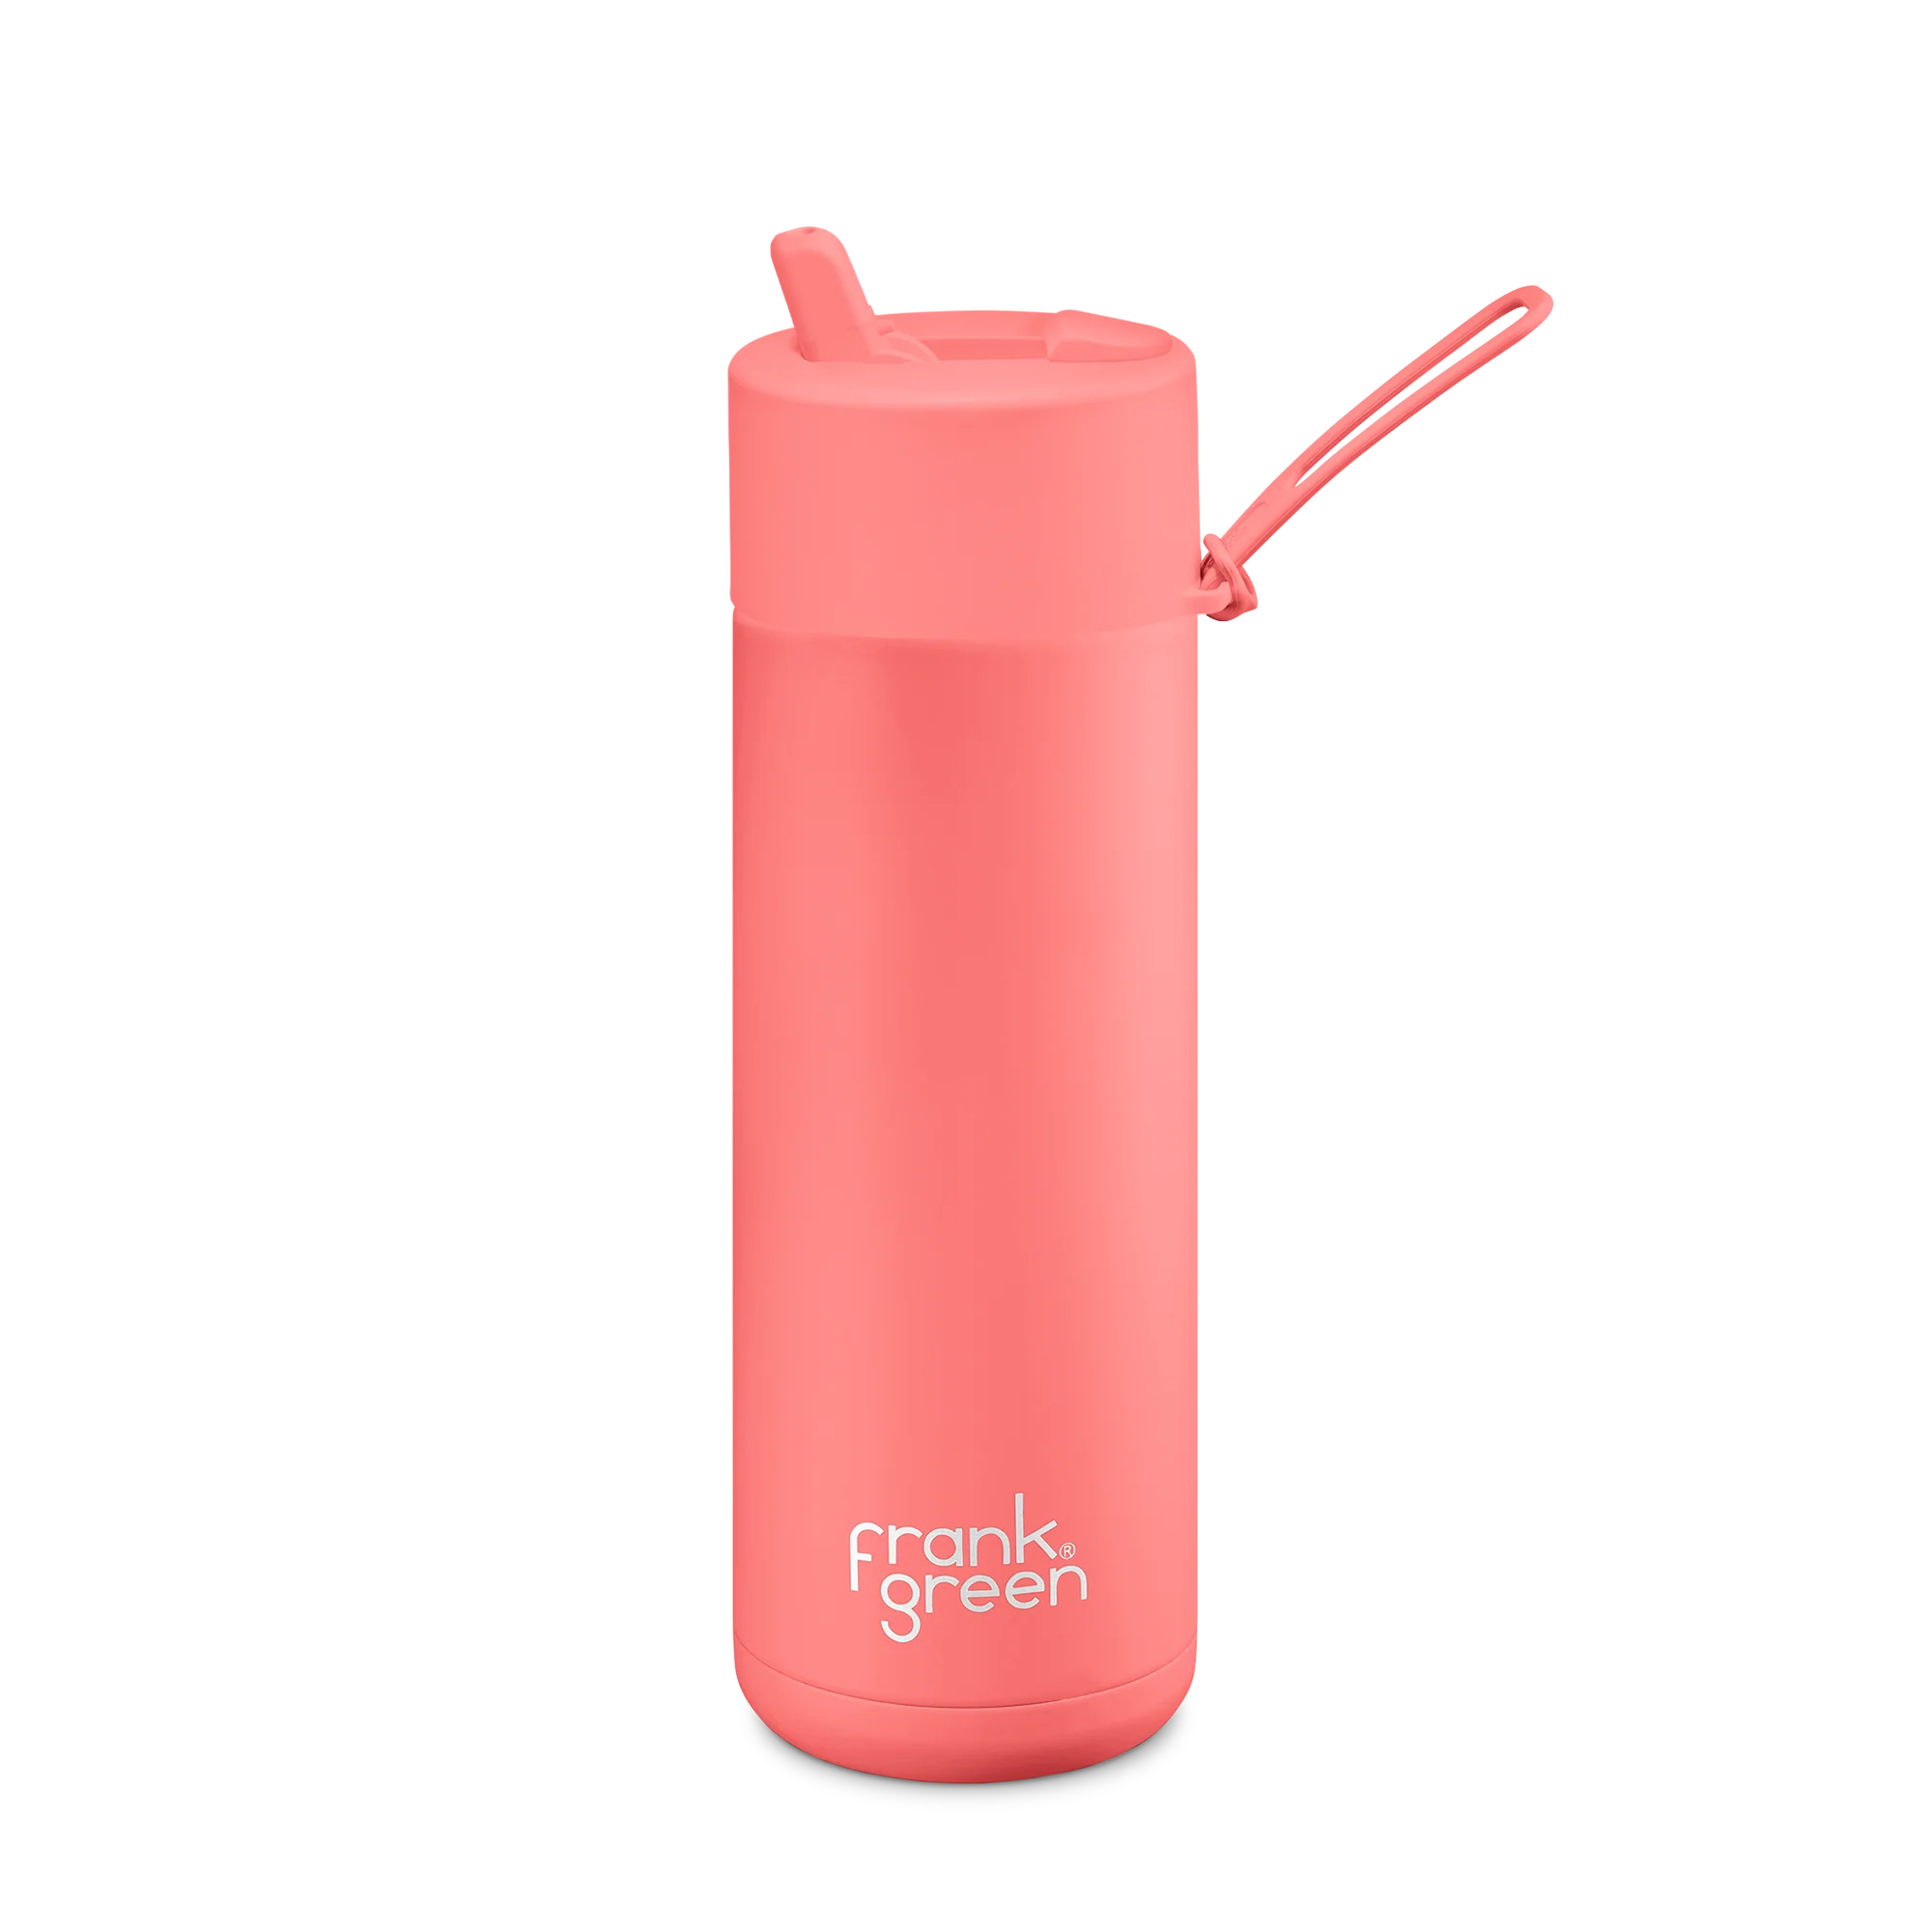 Frank Green Stainless Steel Ceramic Reusable Bottle Sweat Peach With Straw 20oz/595ml